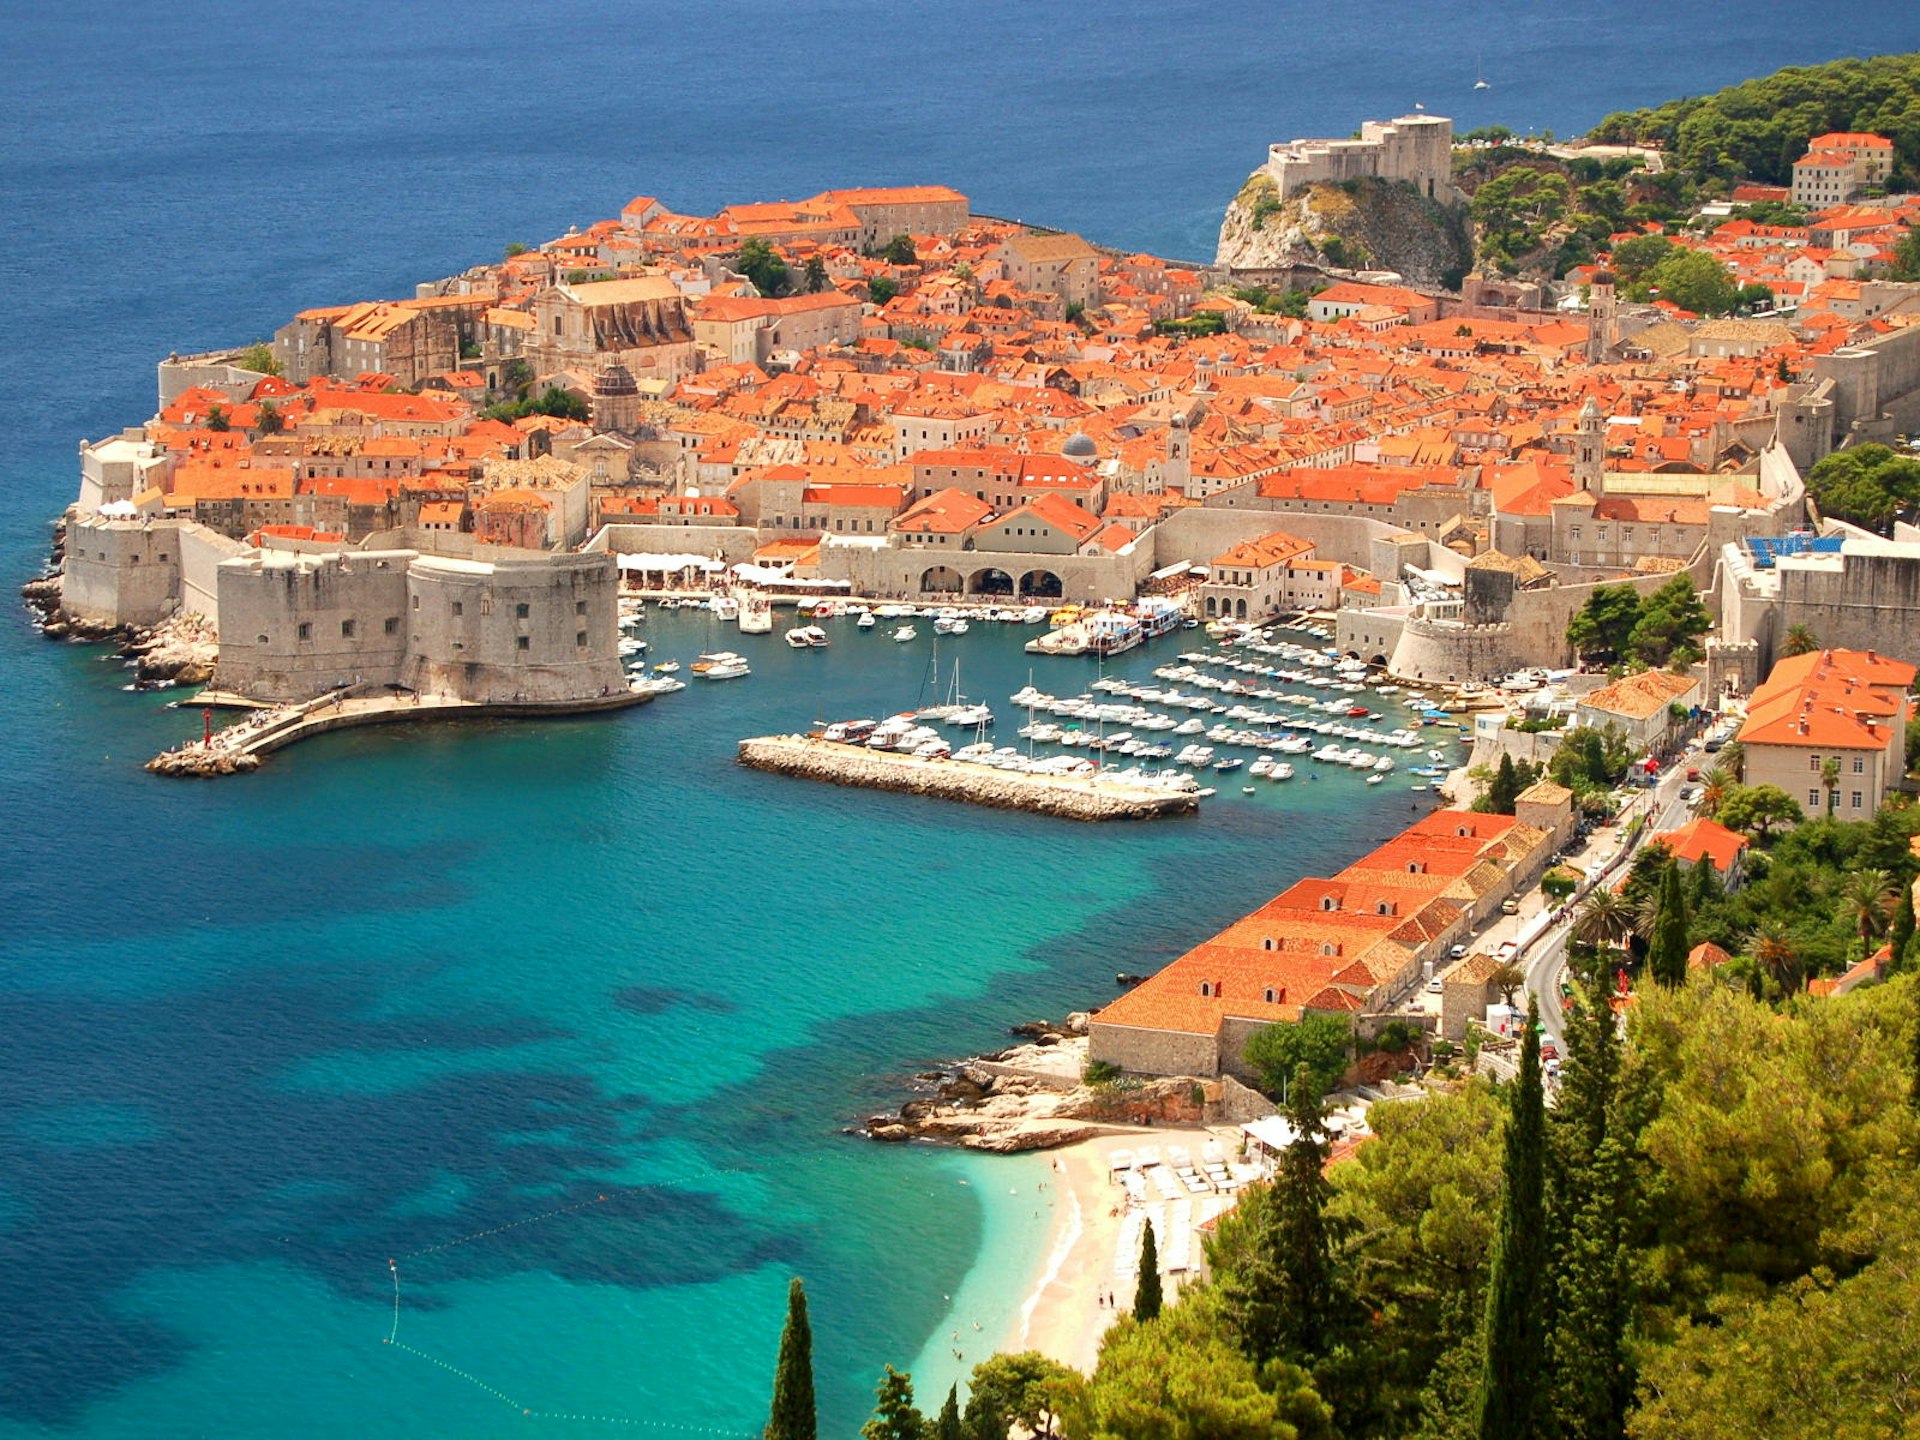 The iconic rooftops of Dubrovnik's old town on the Adriatic © Darios / Shutterstock